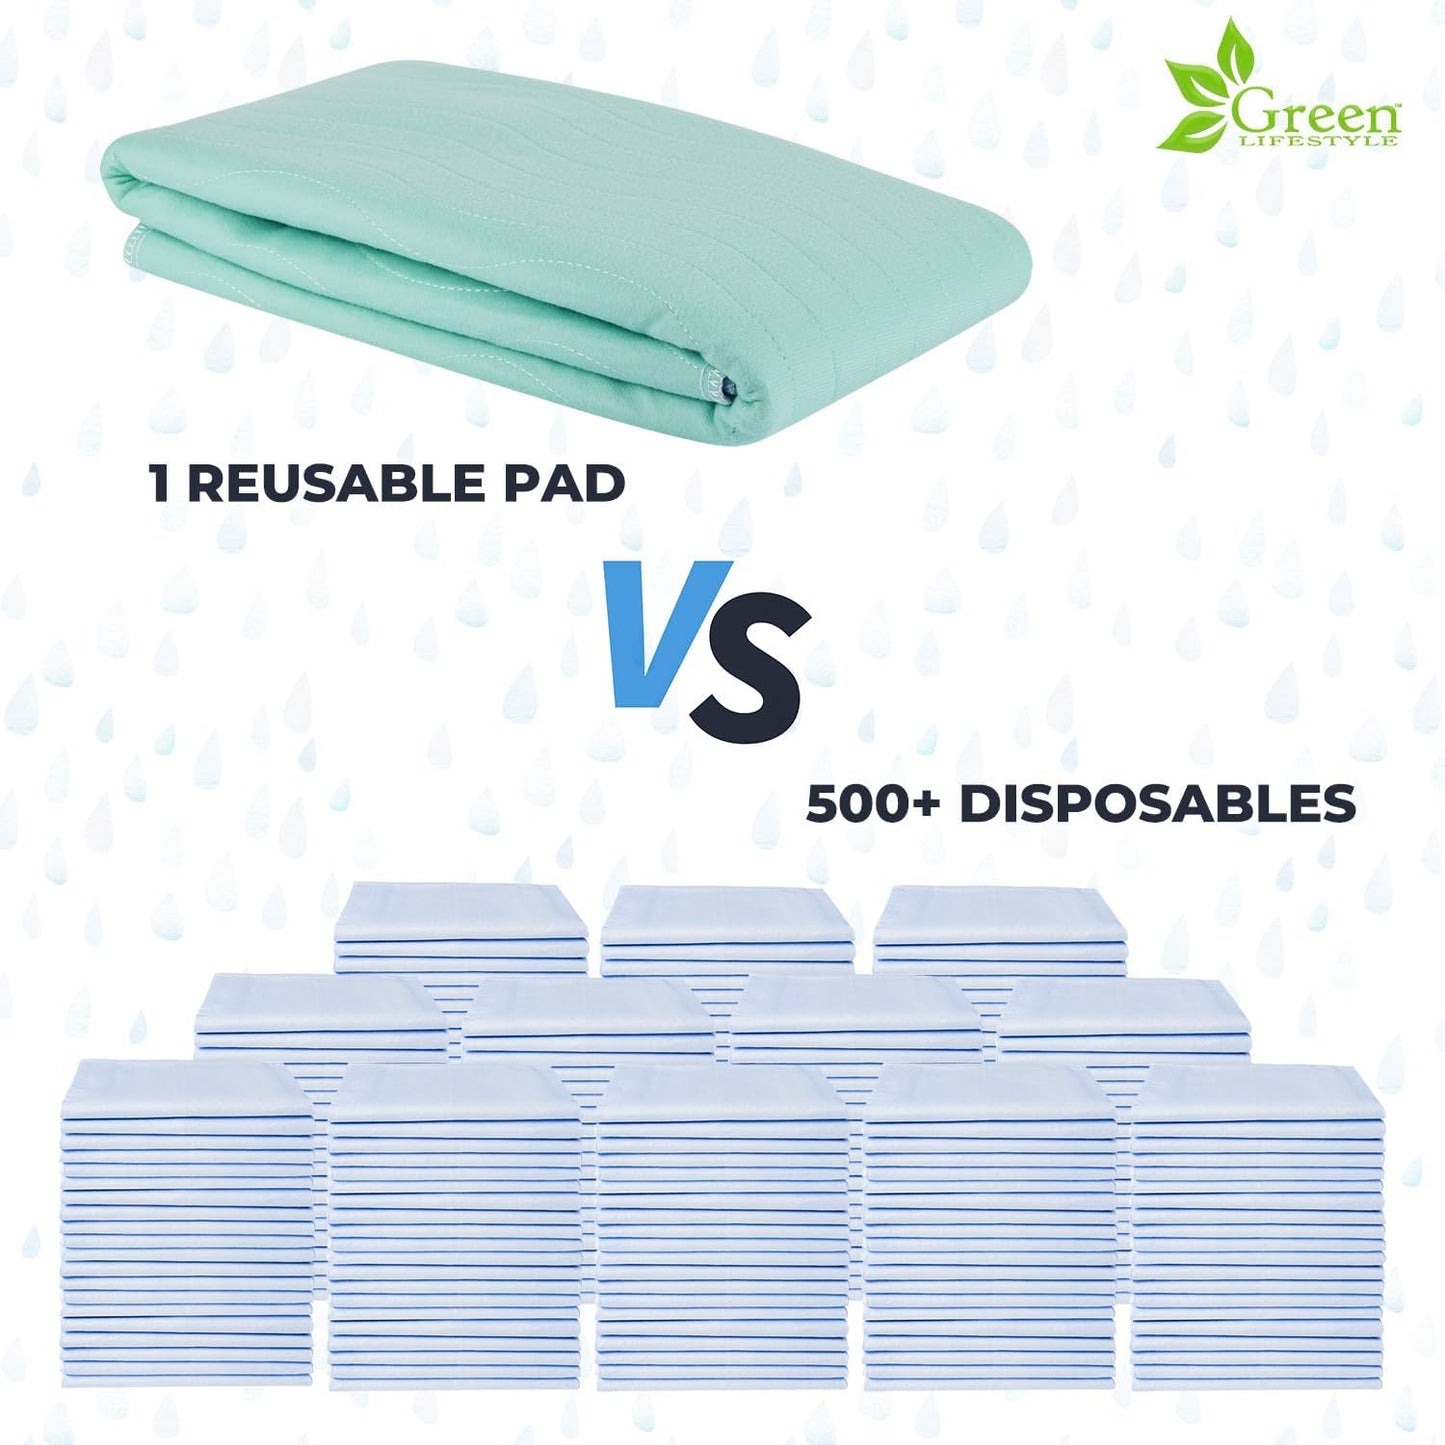 GREEN LIFESTYLE Washable Underpads - Large Bed Pads for use as Incontinence Bed Pads, Reusable Pet Pads, Great for Dogs, Cats, Bunny, Seniors Bed Pad (Pack of 4 - 34x36)